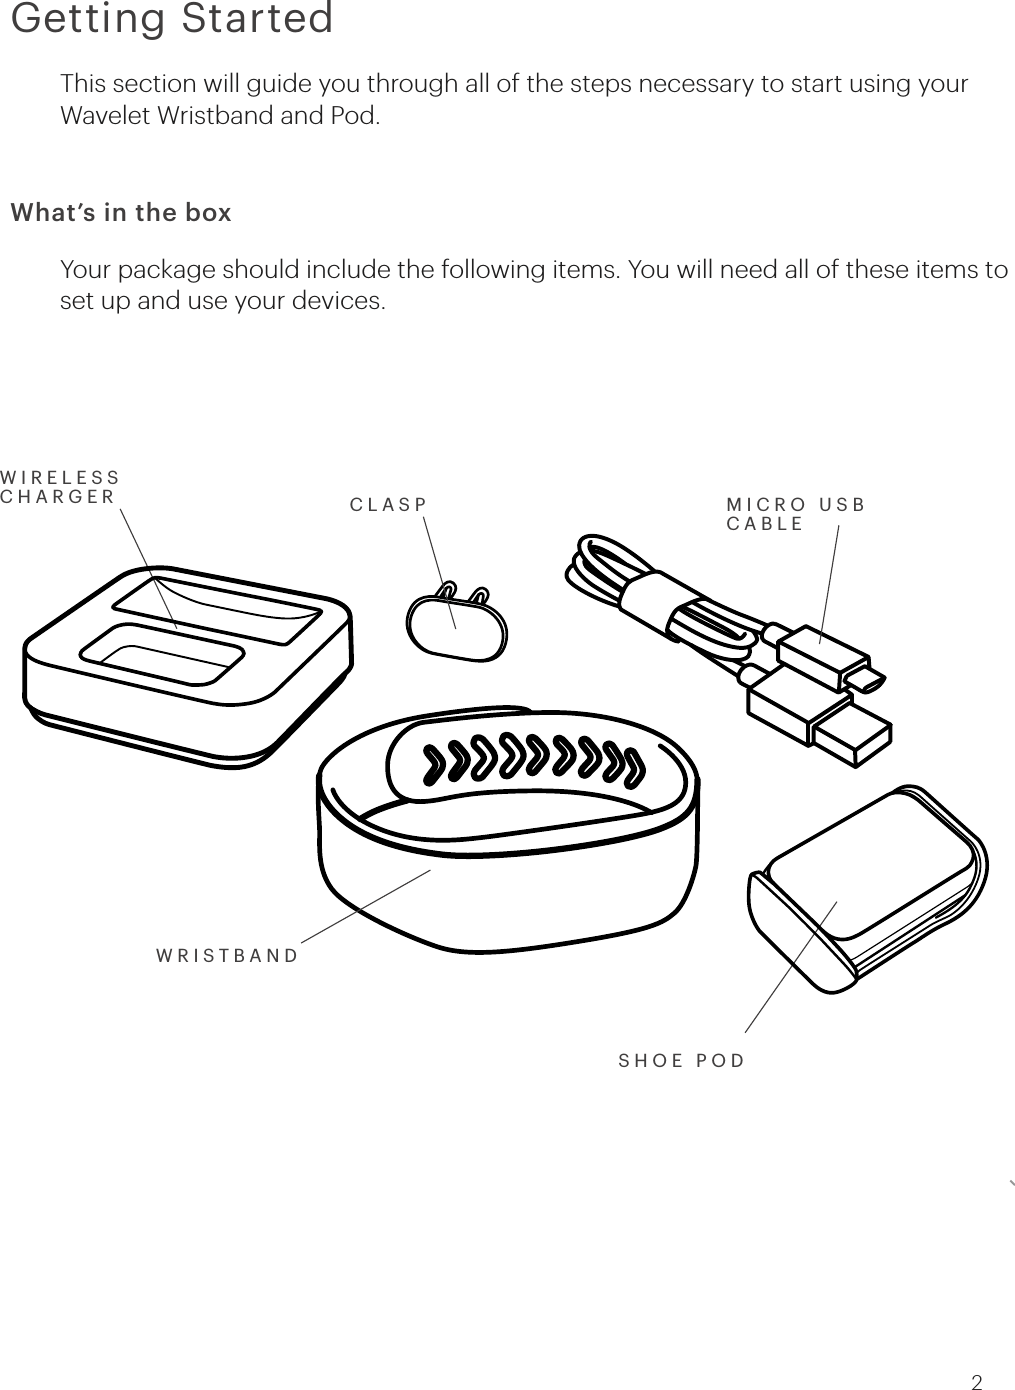 What’s in the boxYour package should include the following items. You will need all of these items to set up and use your devices.WIRELESS CHARGERWRISTBANDSHOE PODMICRO USB CABLECLASPGetting StartedThis section will guide you through all of the steps necessary to start using your Wavelet Wristband and Pod.2